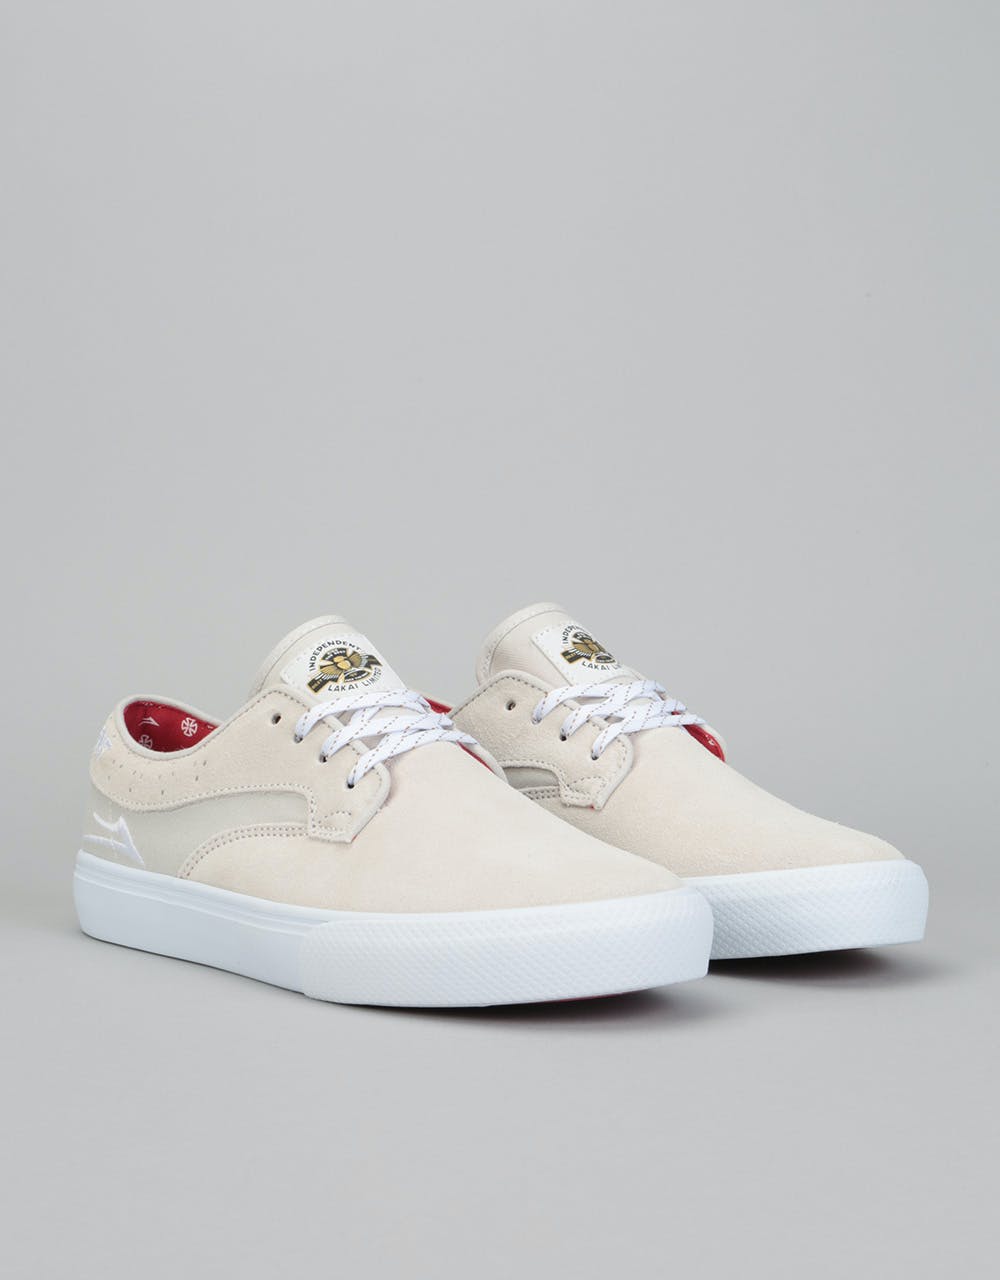 Lakai x Independent Riley Hawk Skate Shoes - White Suede